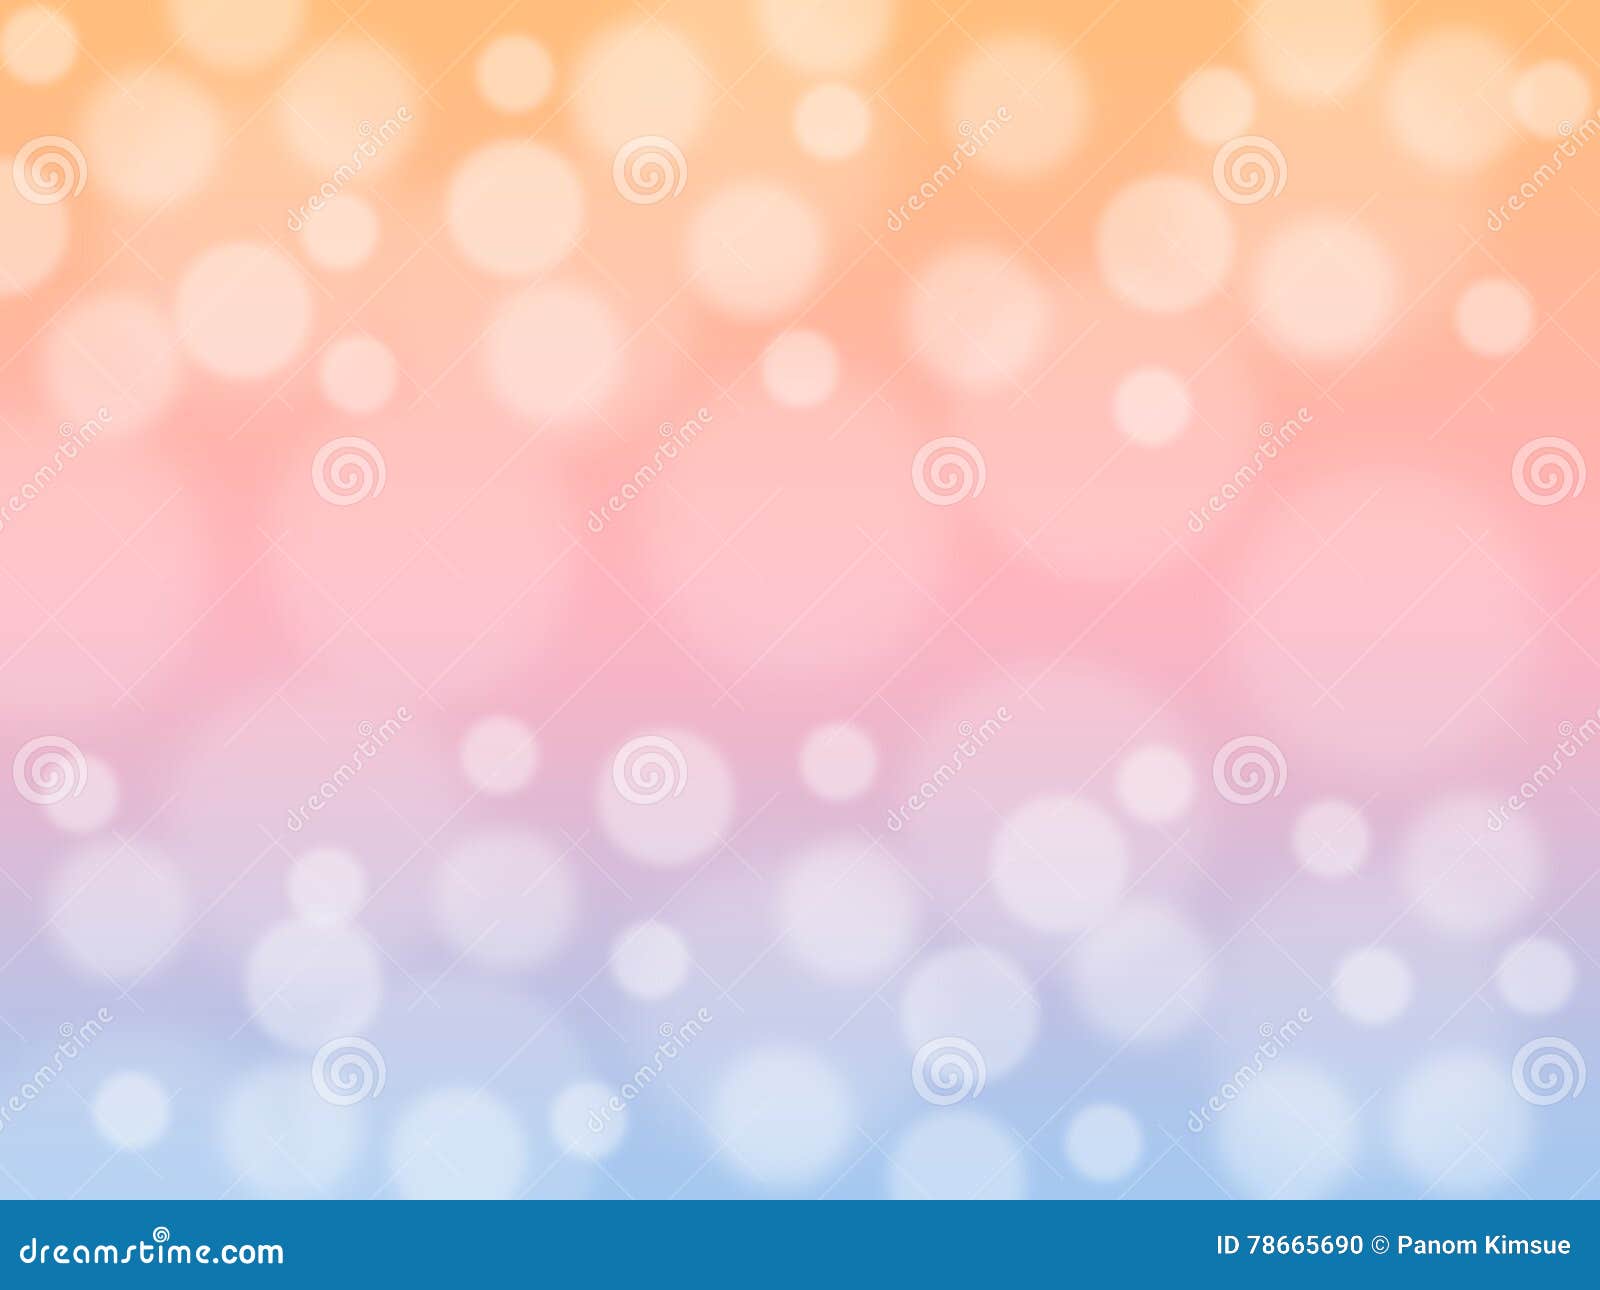 Soft Sweet Blurred Pastel Color Background With Bokeh 